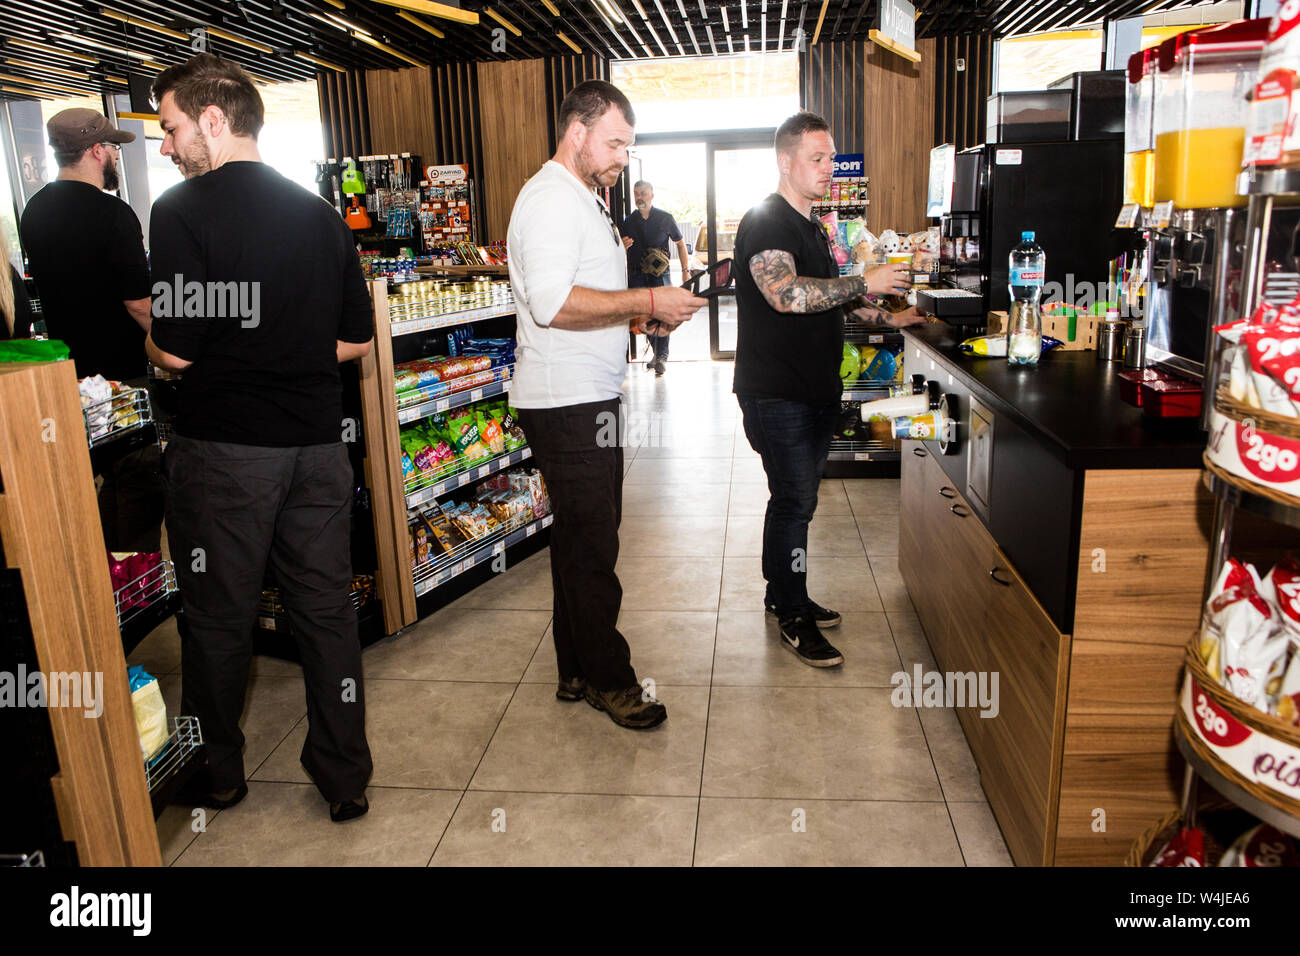 Travelers make stop to have cup of coffee at petrol station in Novi Petrivtsi on way from Kiev to visit Chernobyl as tourism booming after HBO film. Stock Photo